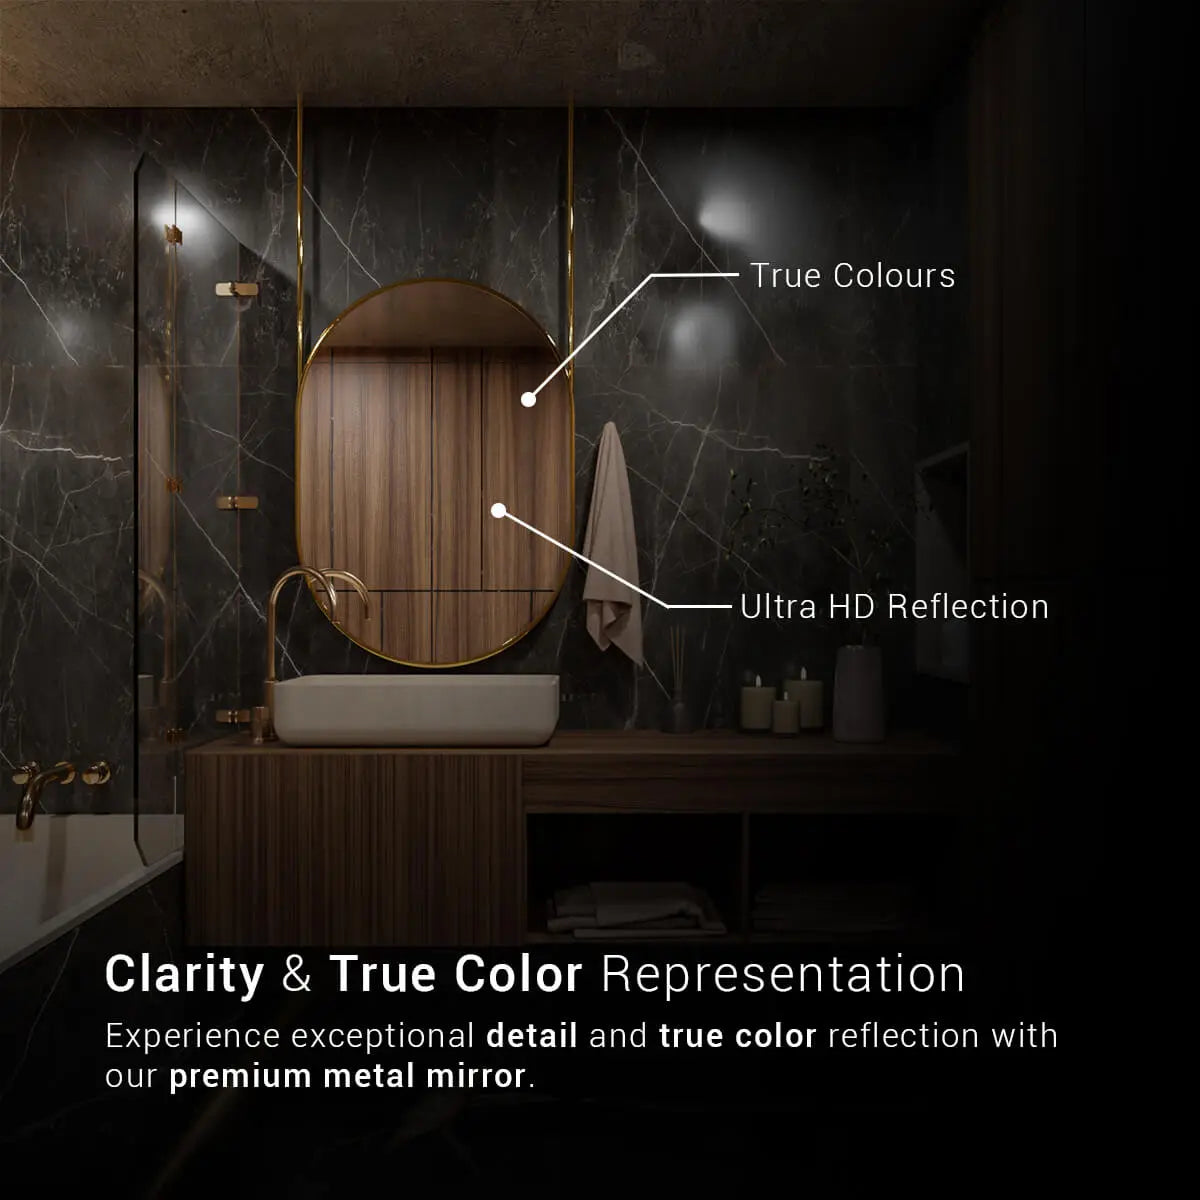 A close-up of a modern bathroom mirror with text in the top left corner that reads "True Colours" and "Ultra HD Reflection". The mirror has a polished metal frame of gold color.